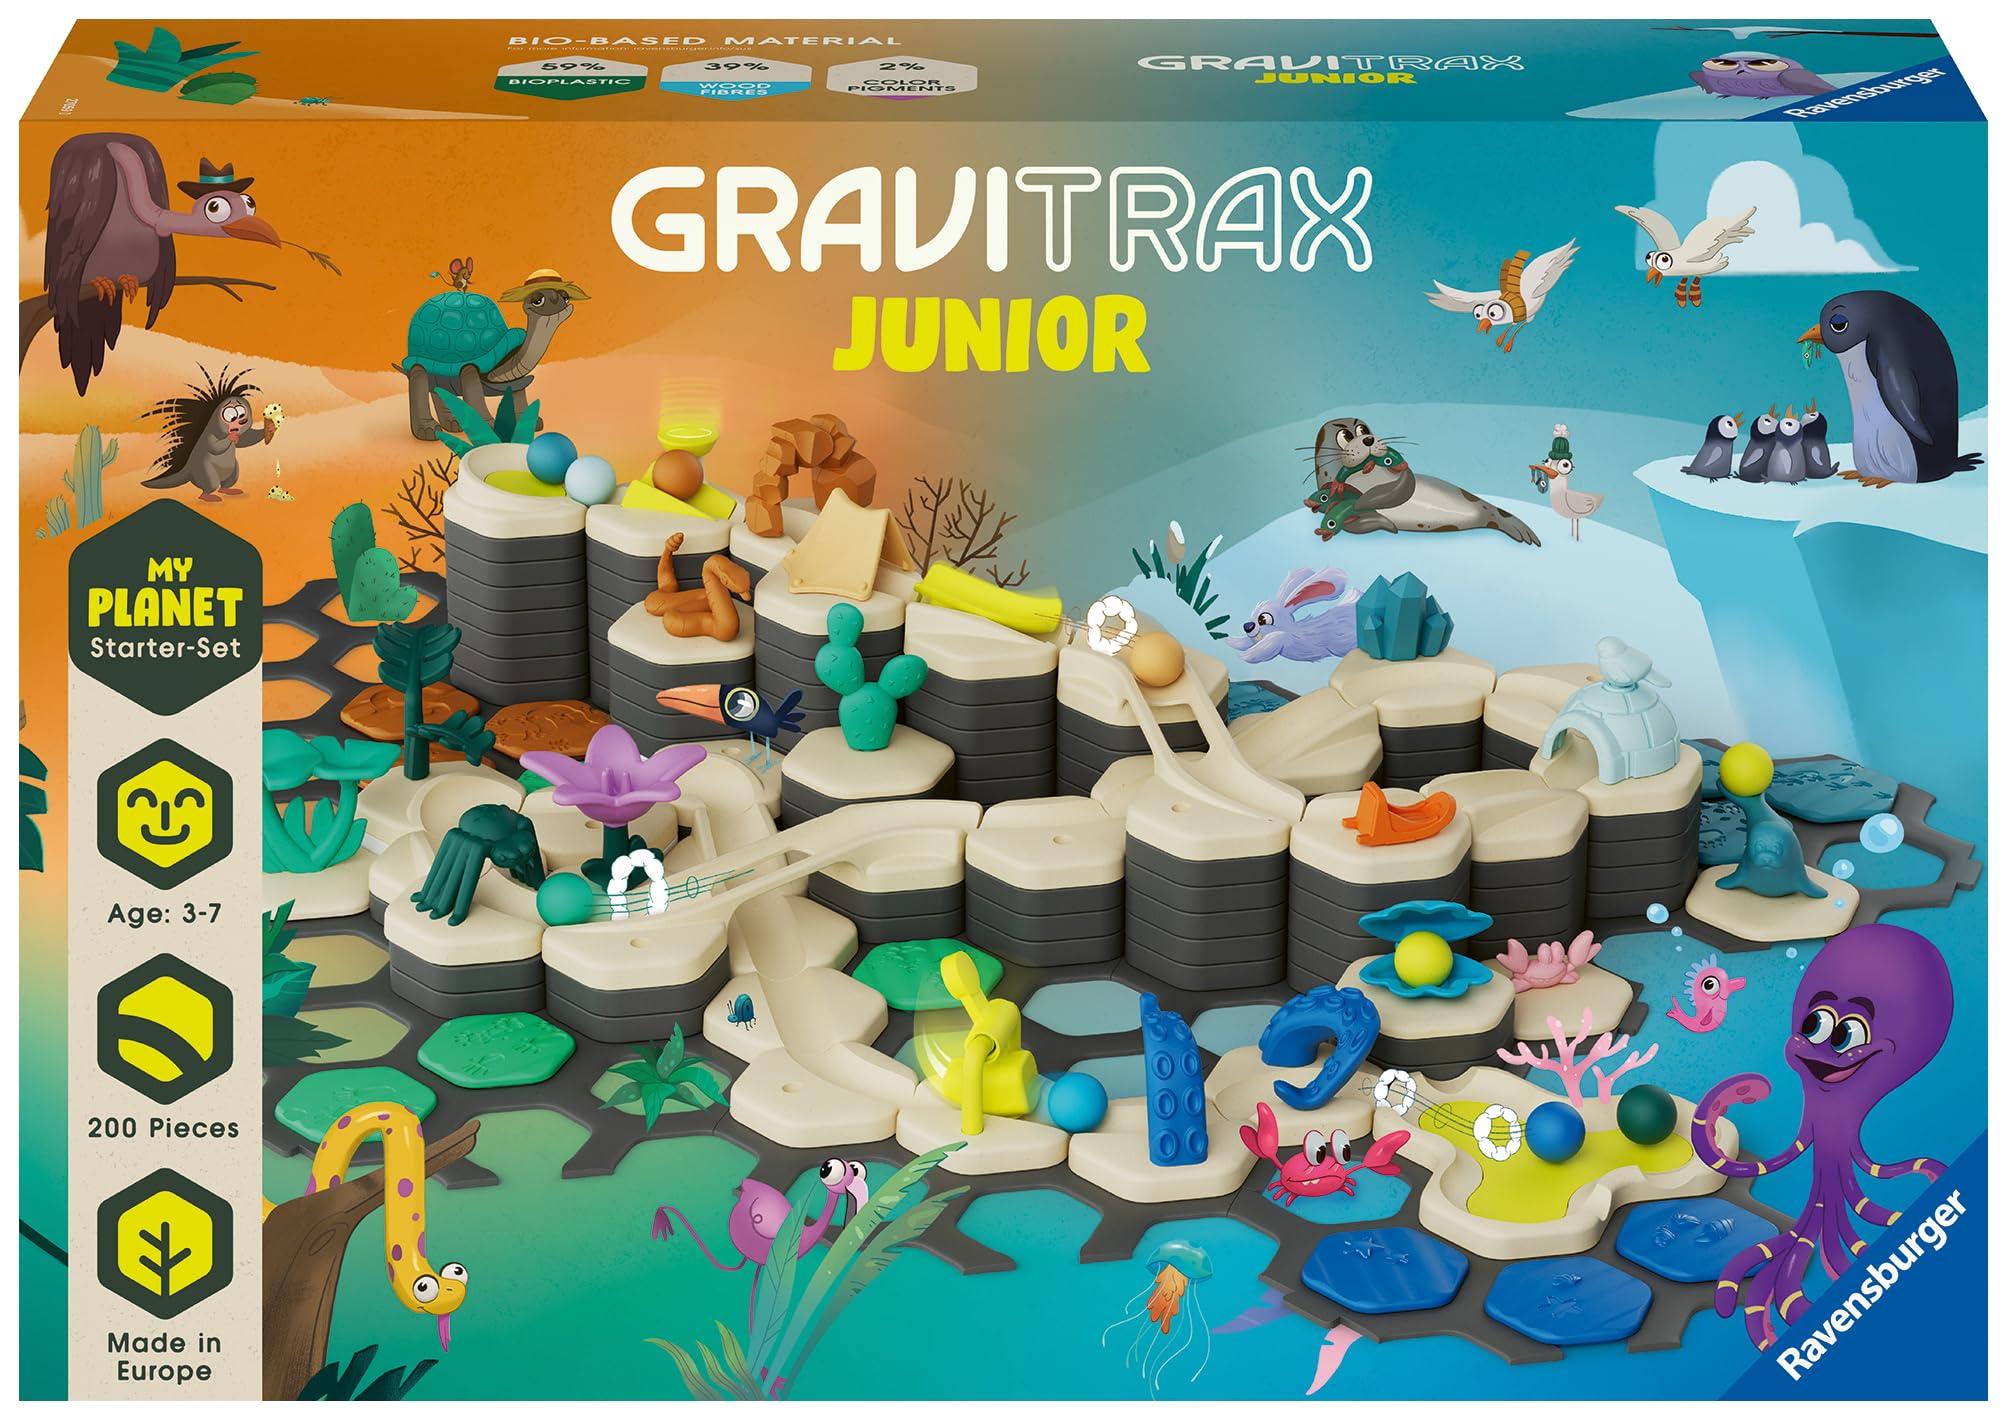 Ravensburger - Gravitrax Junior - Starter Set XXL My Planet 200 pieces - Ball track - Creative building game - Building ball course - From 3 years old - French version - 27059